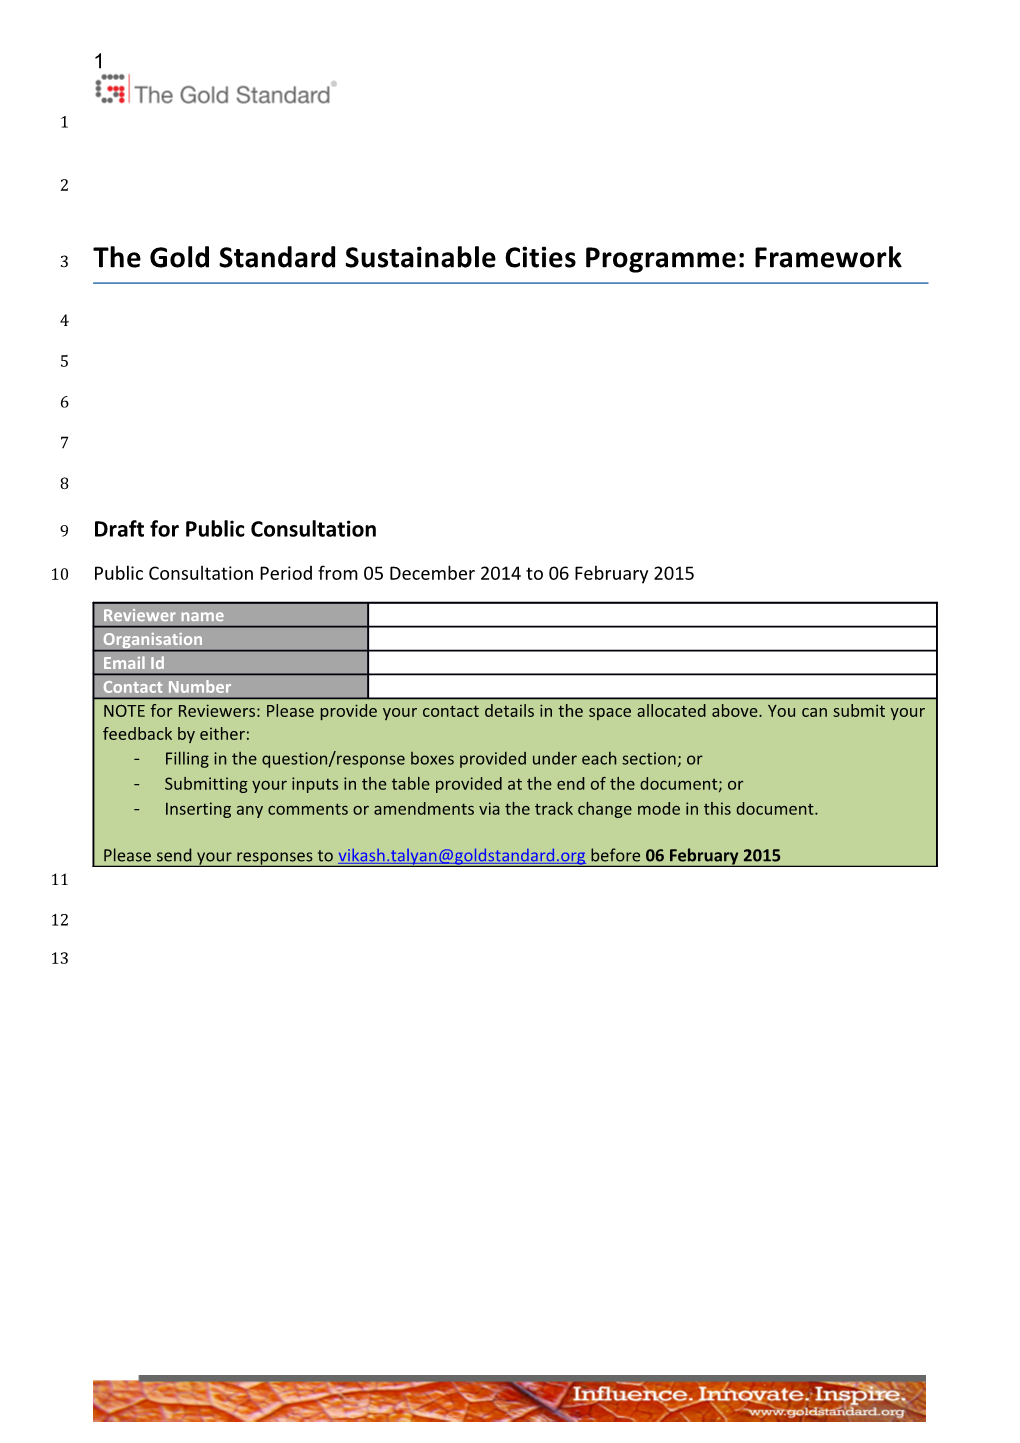 The Gold Standard Sustainable Cities Programme: Framework